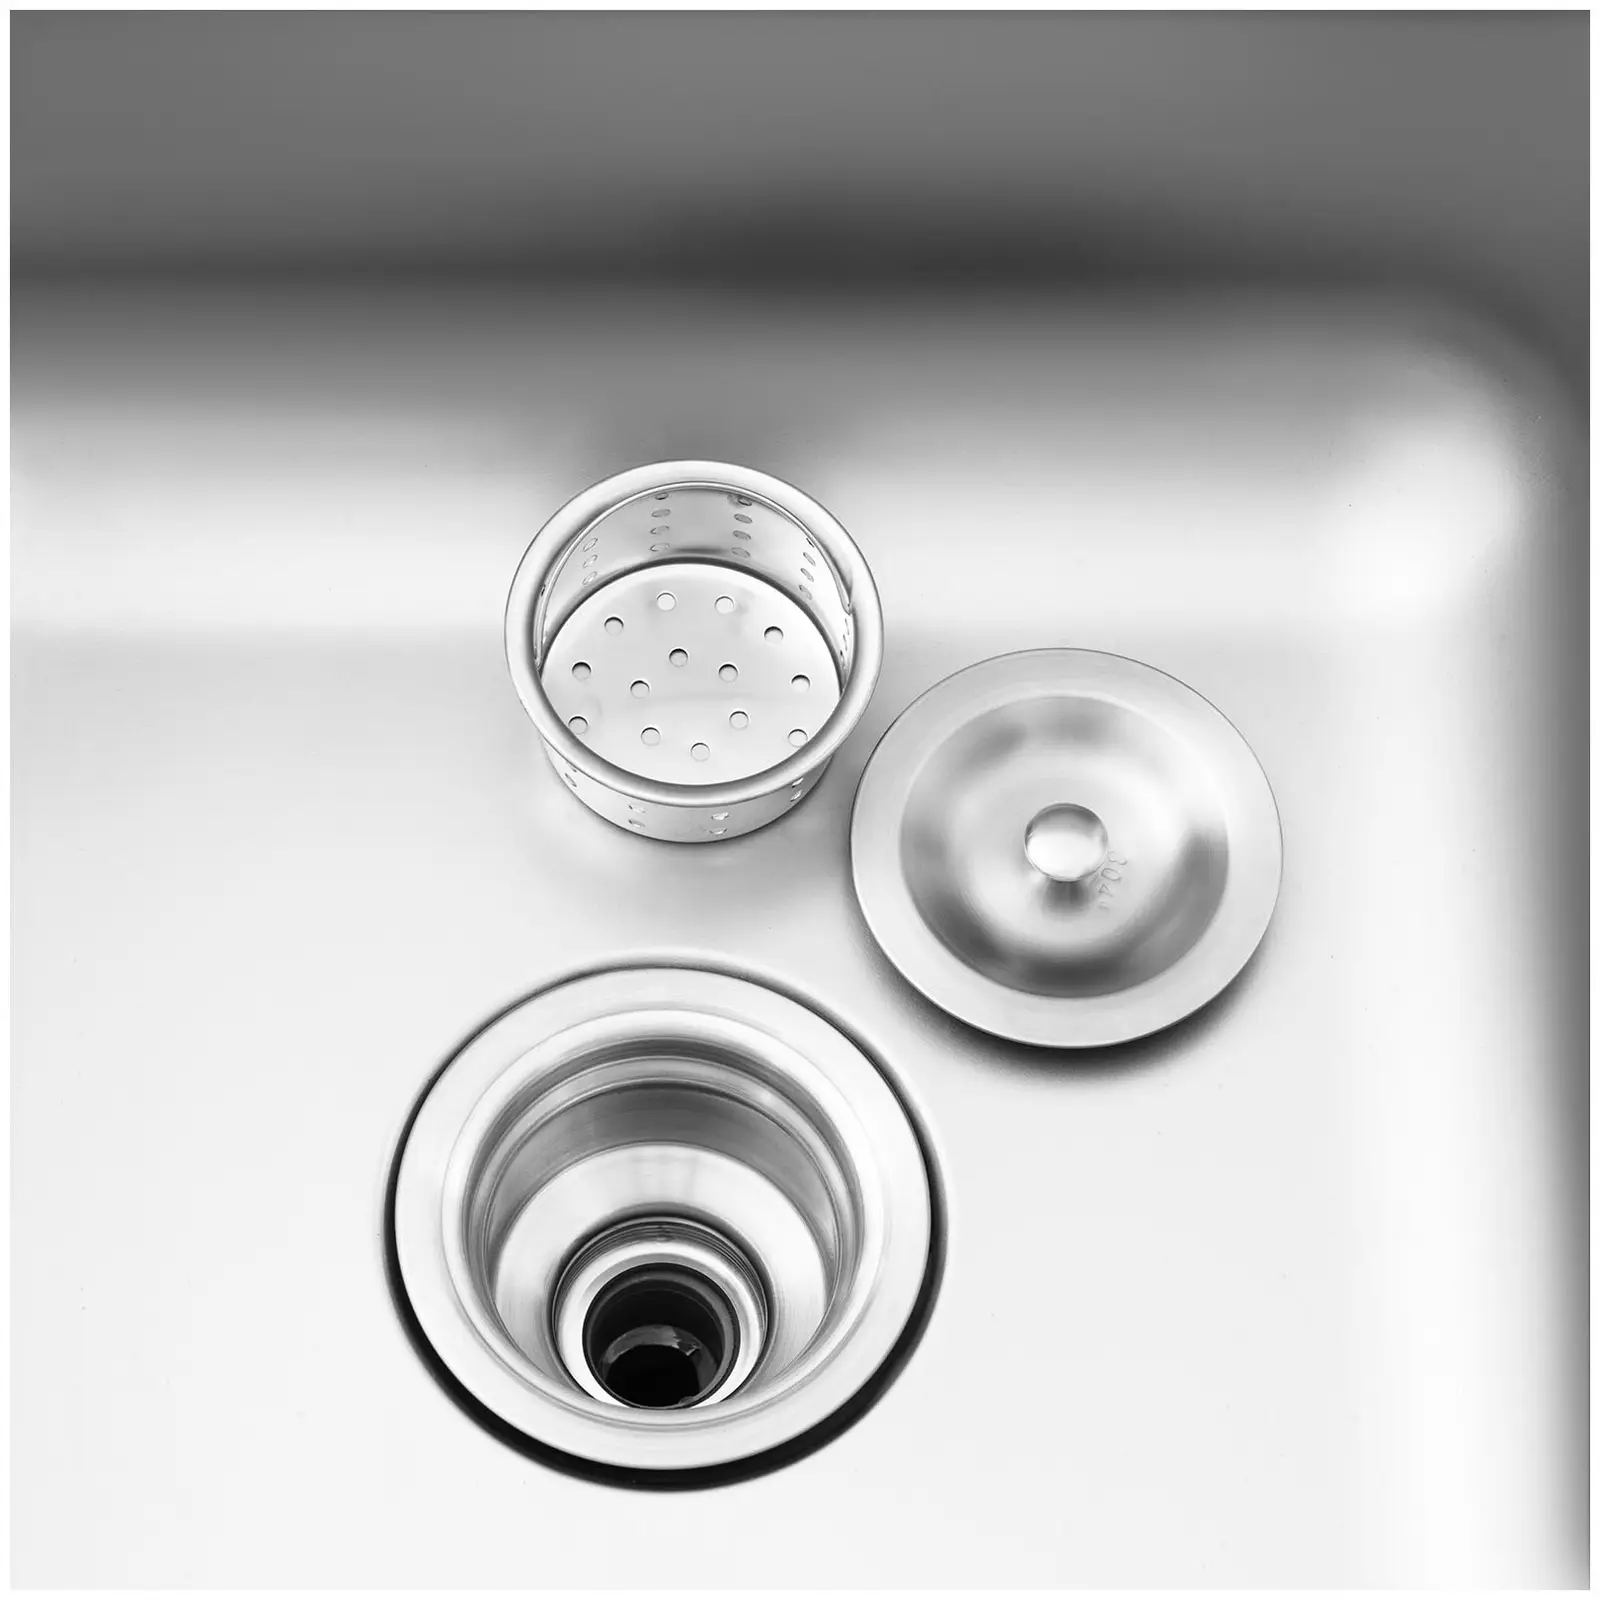 Commercial Kitchen Sink - 2 basins - Royal Catering - Stainless steel - 400 x 400 x 300 mm